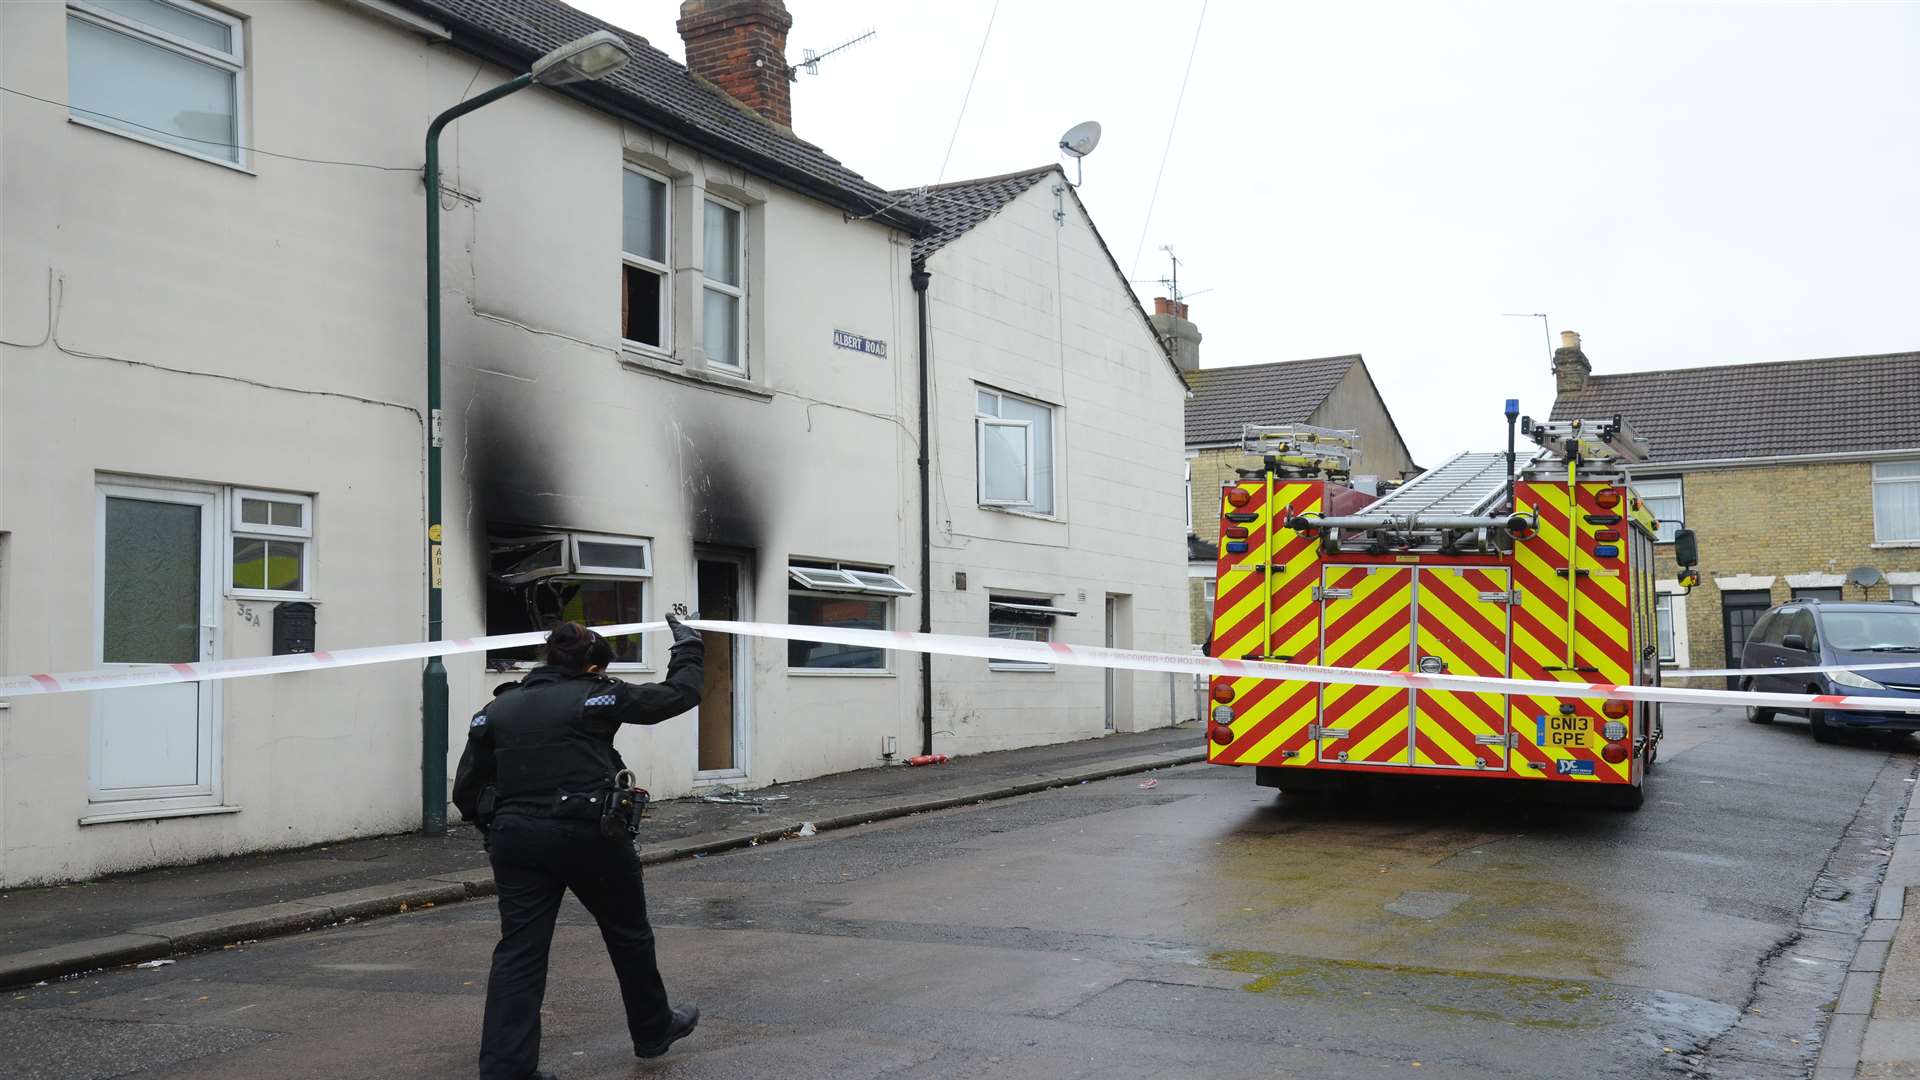 The scene of the fire in Albert Road.